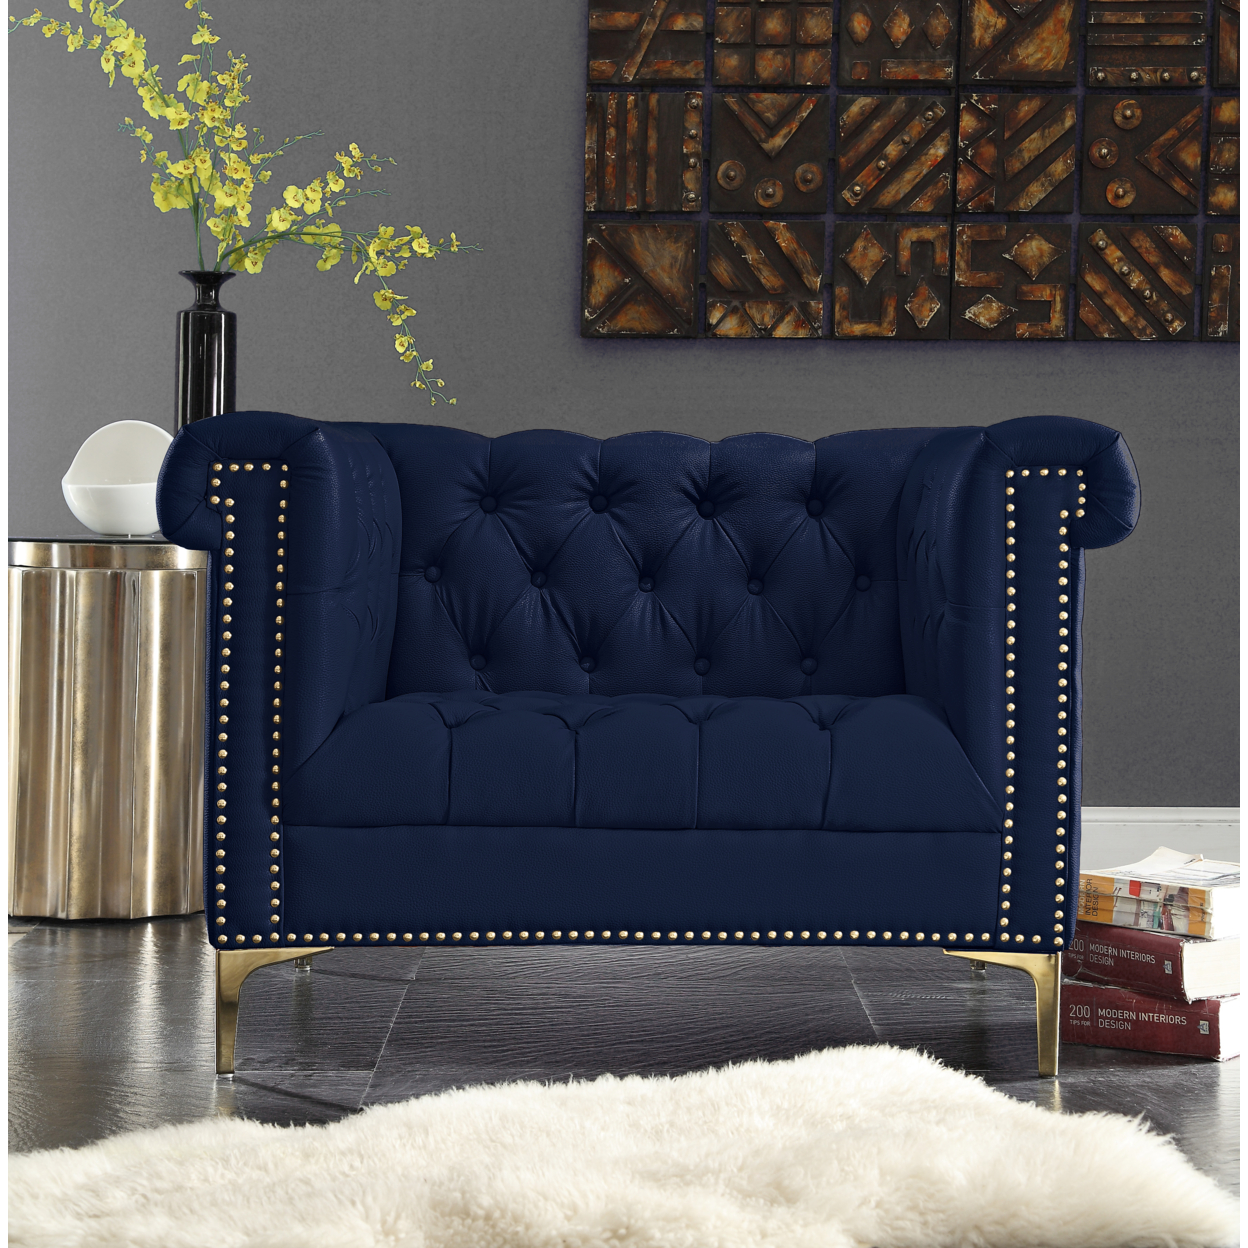 MacArthur PU Leather Modern Contemporary Button Tufted With Gold Nailhead Trim Goldtone Metal Y-leg Club Chair - Navy Blue